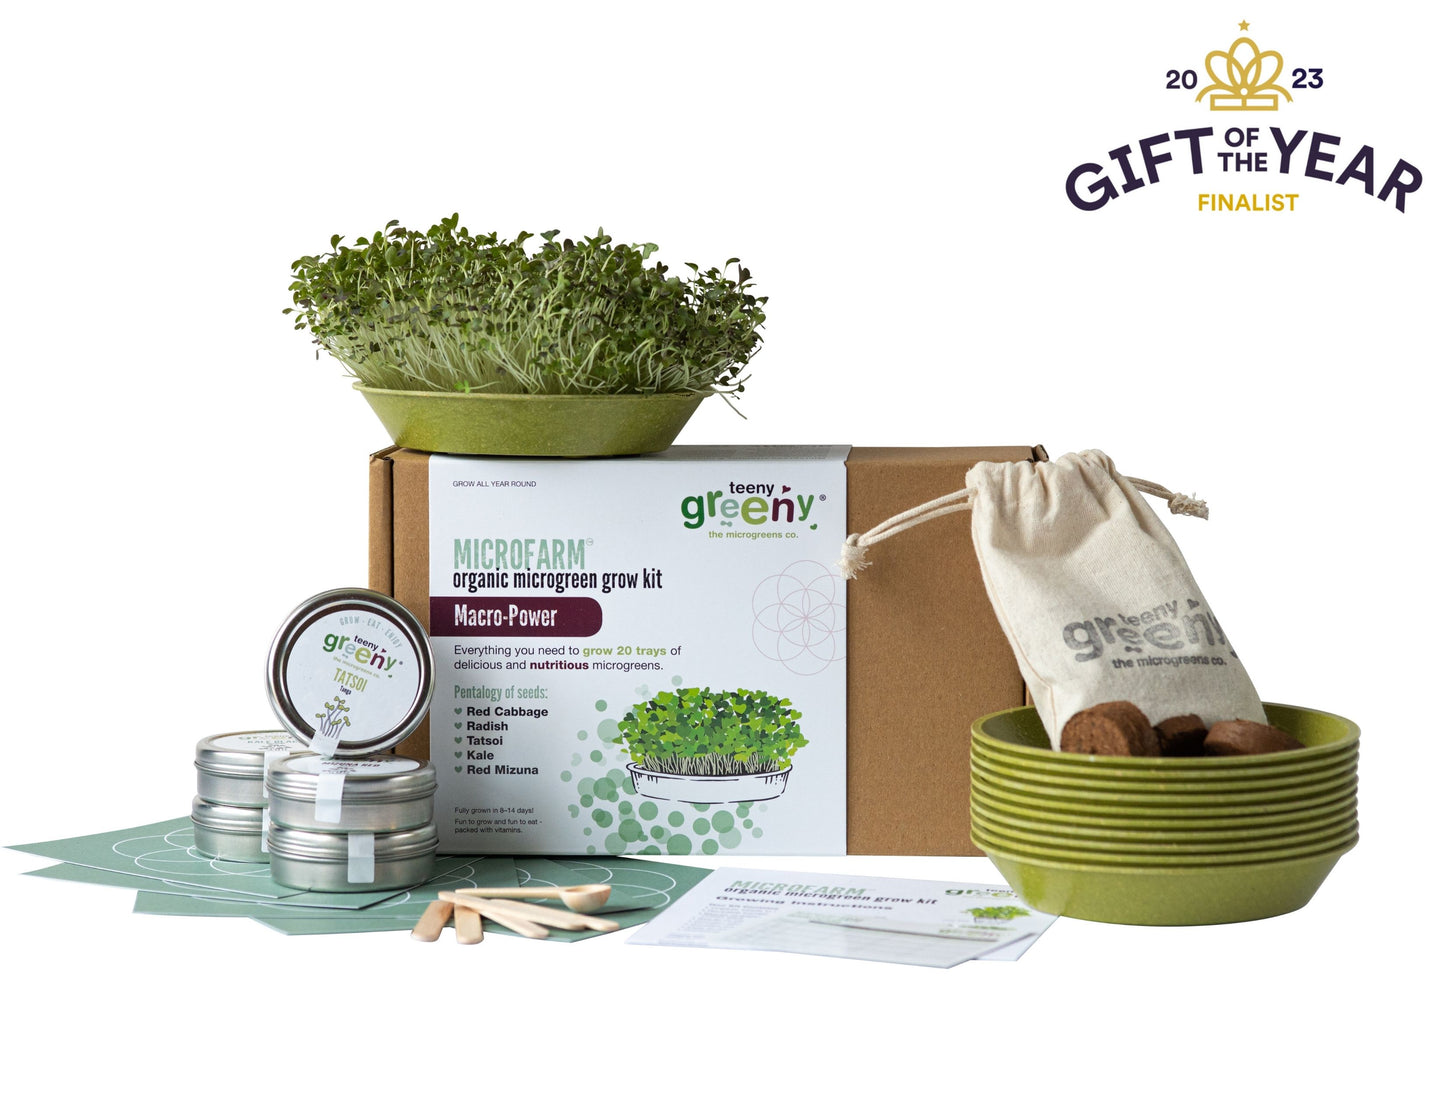 The Ultimate Gift for Foodies and Eco Enthusiasts